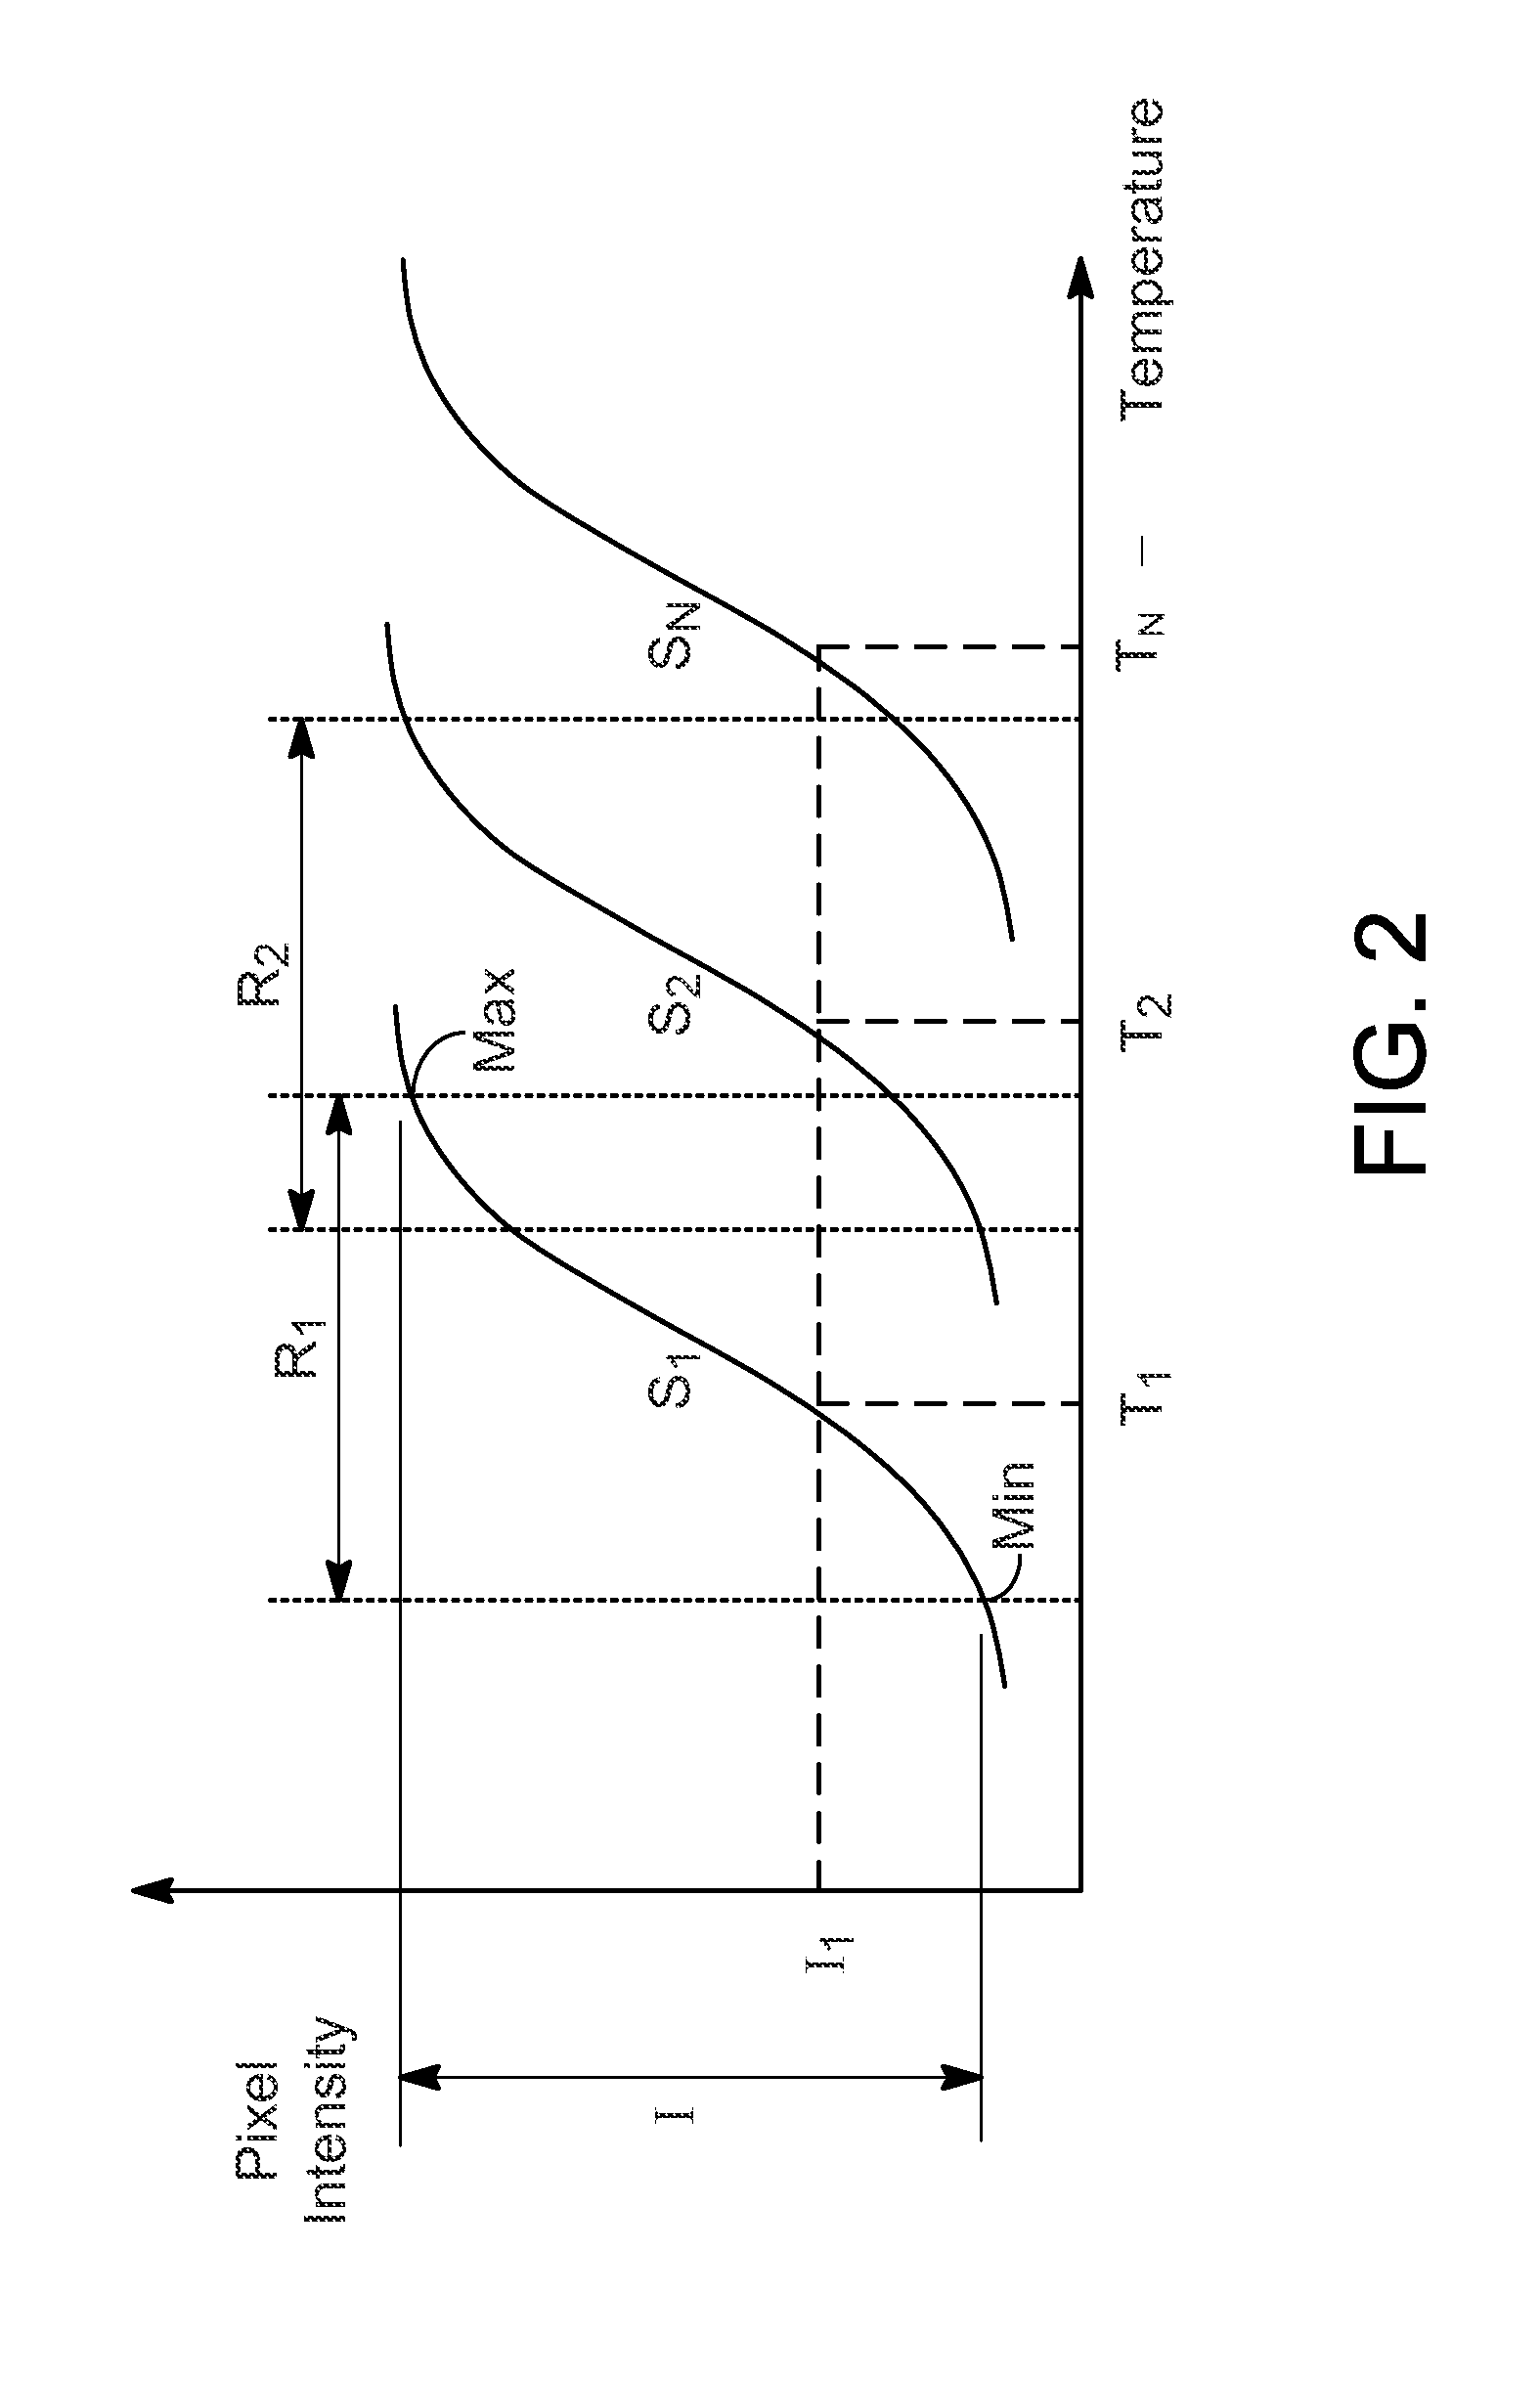 Extended temperature range mapping process of a furnace enclosure using various device settings